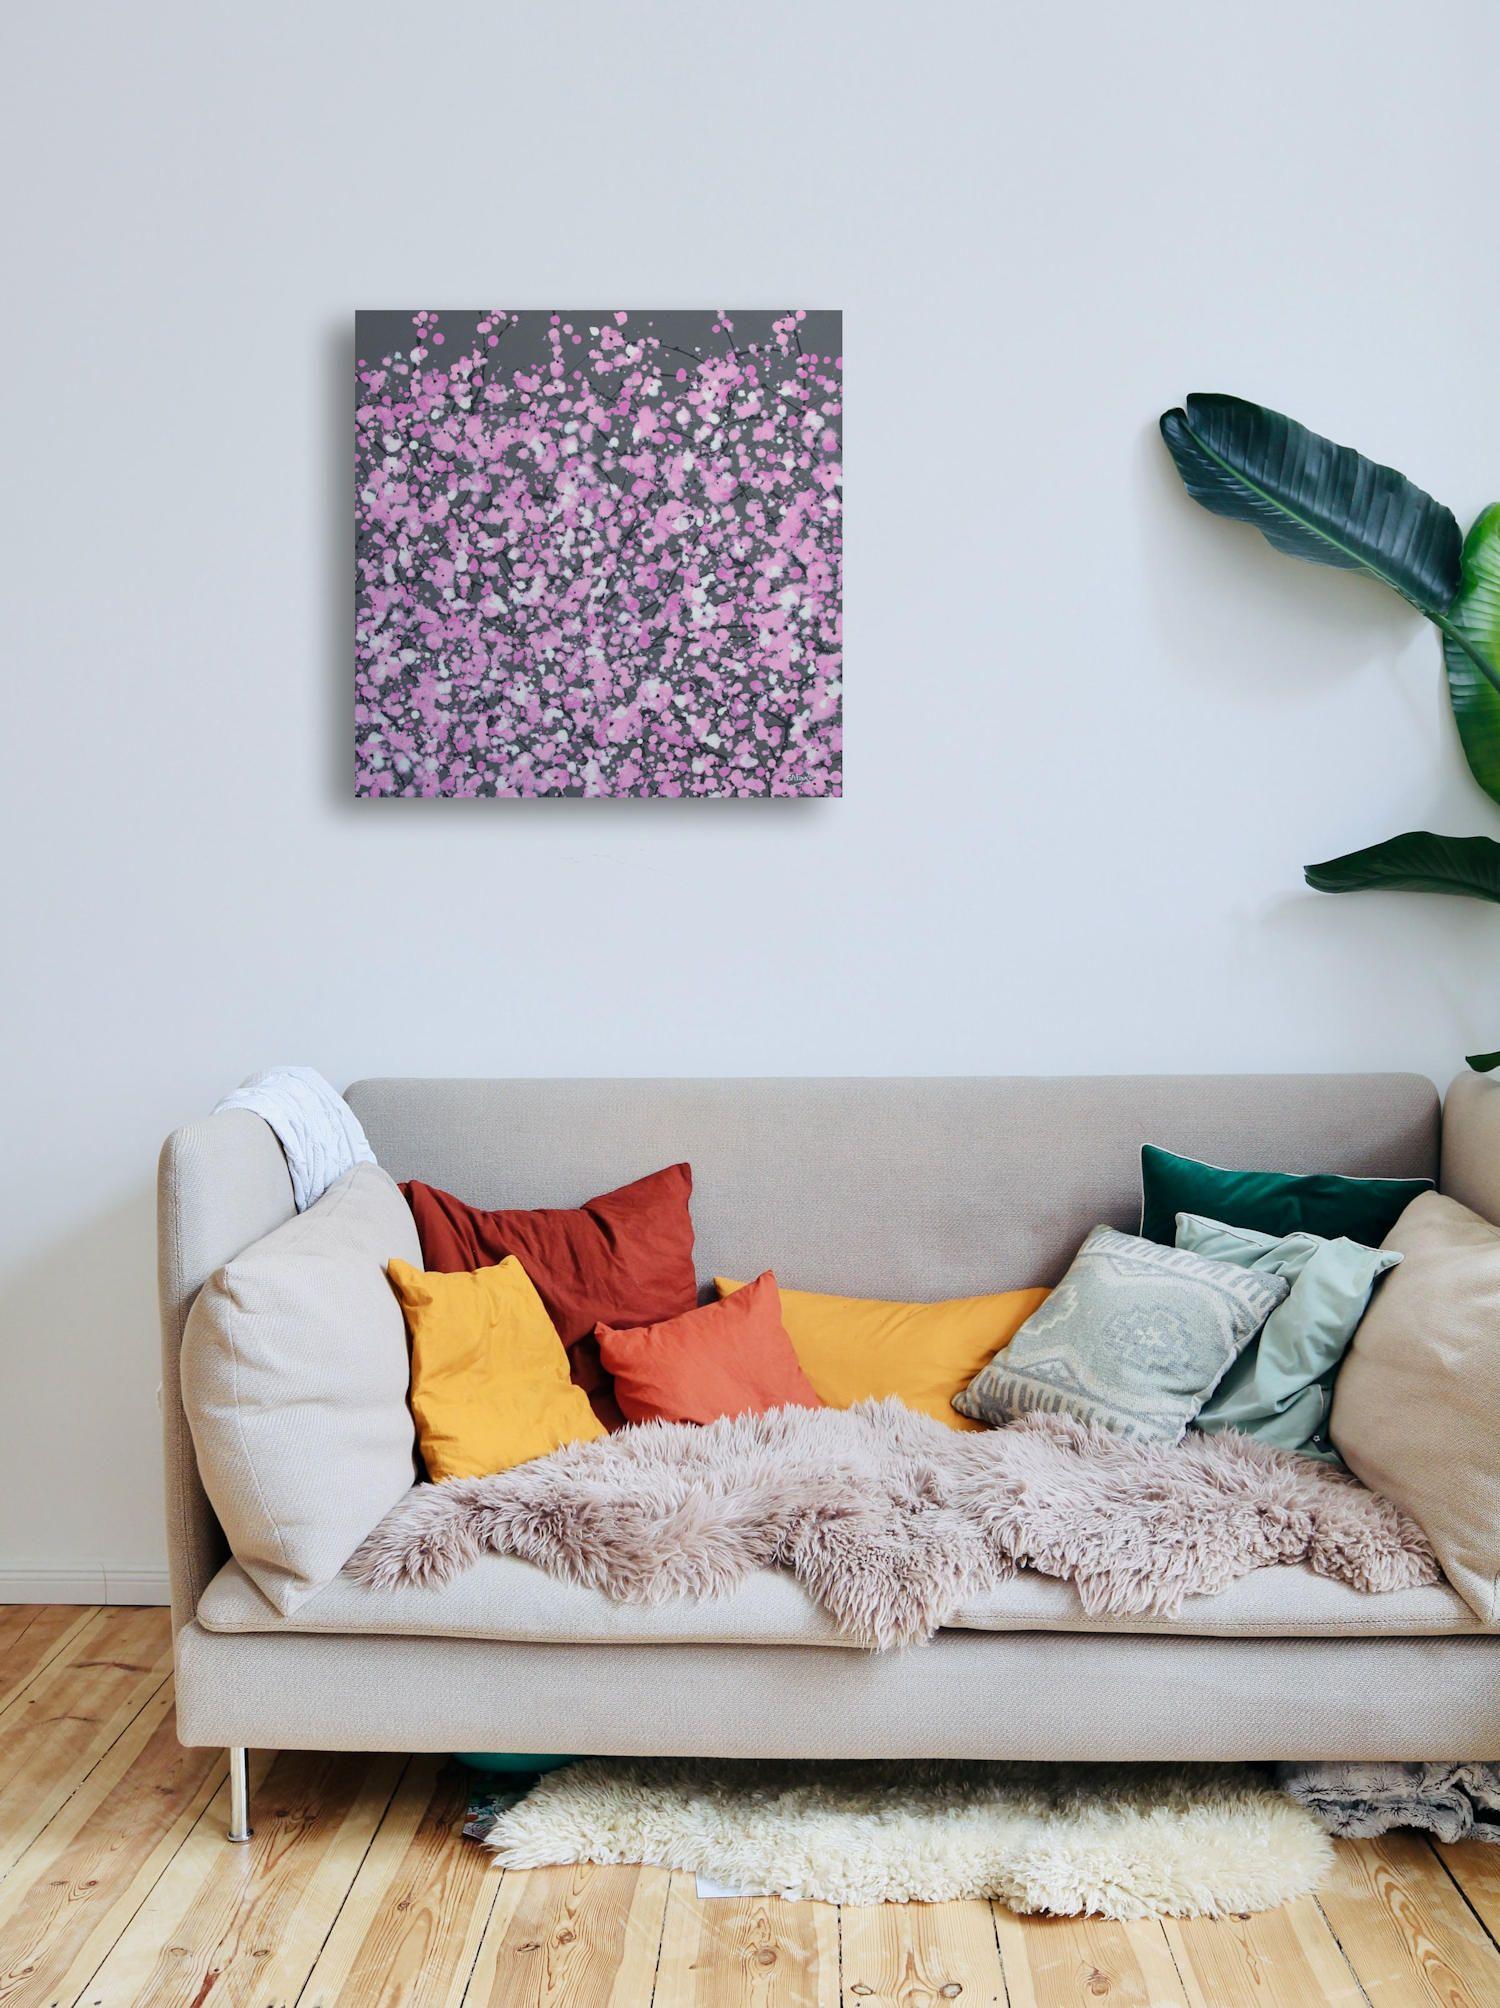 Spring Blossom - Pink, Painting, Acrylic on Canvas - Gray Abstract Painting by Simon Fairless